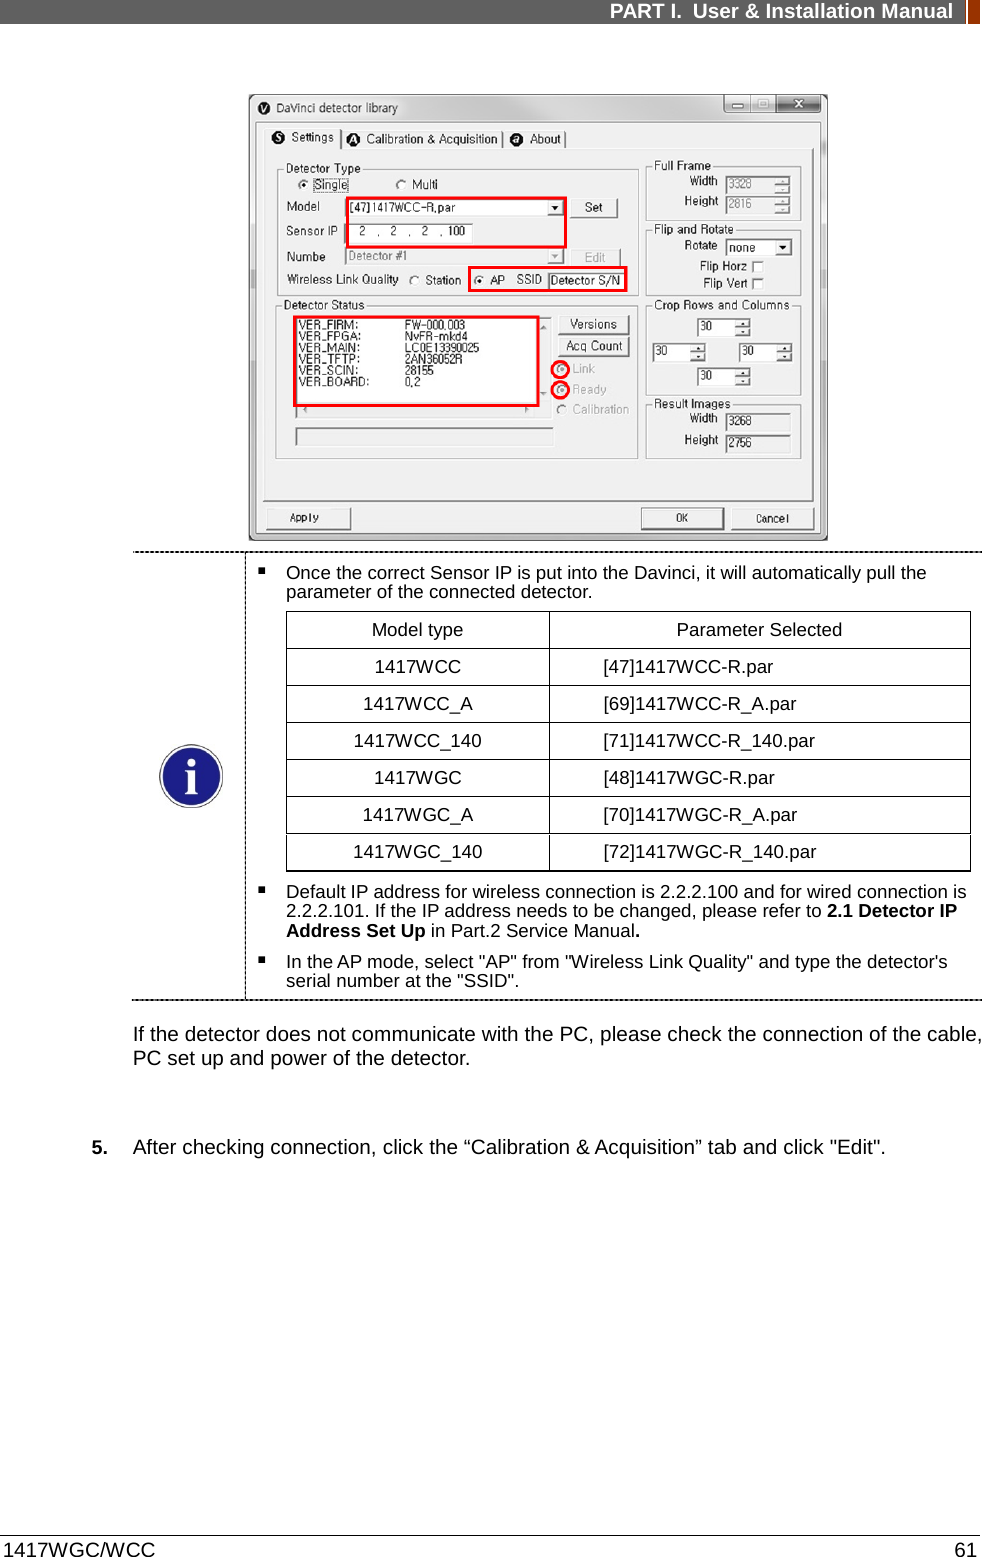 PART I. User &amp; Installation Manual  1417WGC/WCC 61      Once the correct Sensor IP is put into the Davinci, it will automatically pull the parameter of the connected detector. Model type Parameter Selected 1417WCC  [47]1417WCC-R.par 1417WCC_A [69]1417WCC-R_A.par 1417WCC_140 [71]1417WCC-R_140.par 1417WGC [48]1417WGC-R.par 1417WGC_A [70]1417WGC-R_A.par 1417WGC_140 [72]1417WGC-R_140.par  Default IP address for wireless connection is 2.2.2.100 and for wired connection is 2.2.2.101. If the IP address needs to be changed, please refer to 2.1 Detector IP Address Set Up in Part.2 Service Manual.  In the AP mode, select &quot;AP&quot; from &quot;Wireless Link Quality&quot; and type the detector&apos;s serial number at the &quot;SSID&quot;. If the detector does not communicate with the PC, please check the connection of the cable, PC set up and power of the detector.  5. After checking connection, click the “Calibration &amp; Acquisition” tab and click &quot;Edit&quot;. 